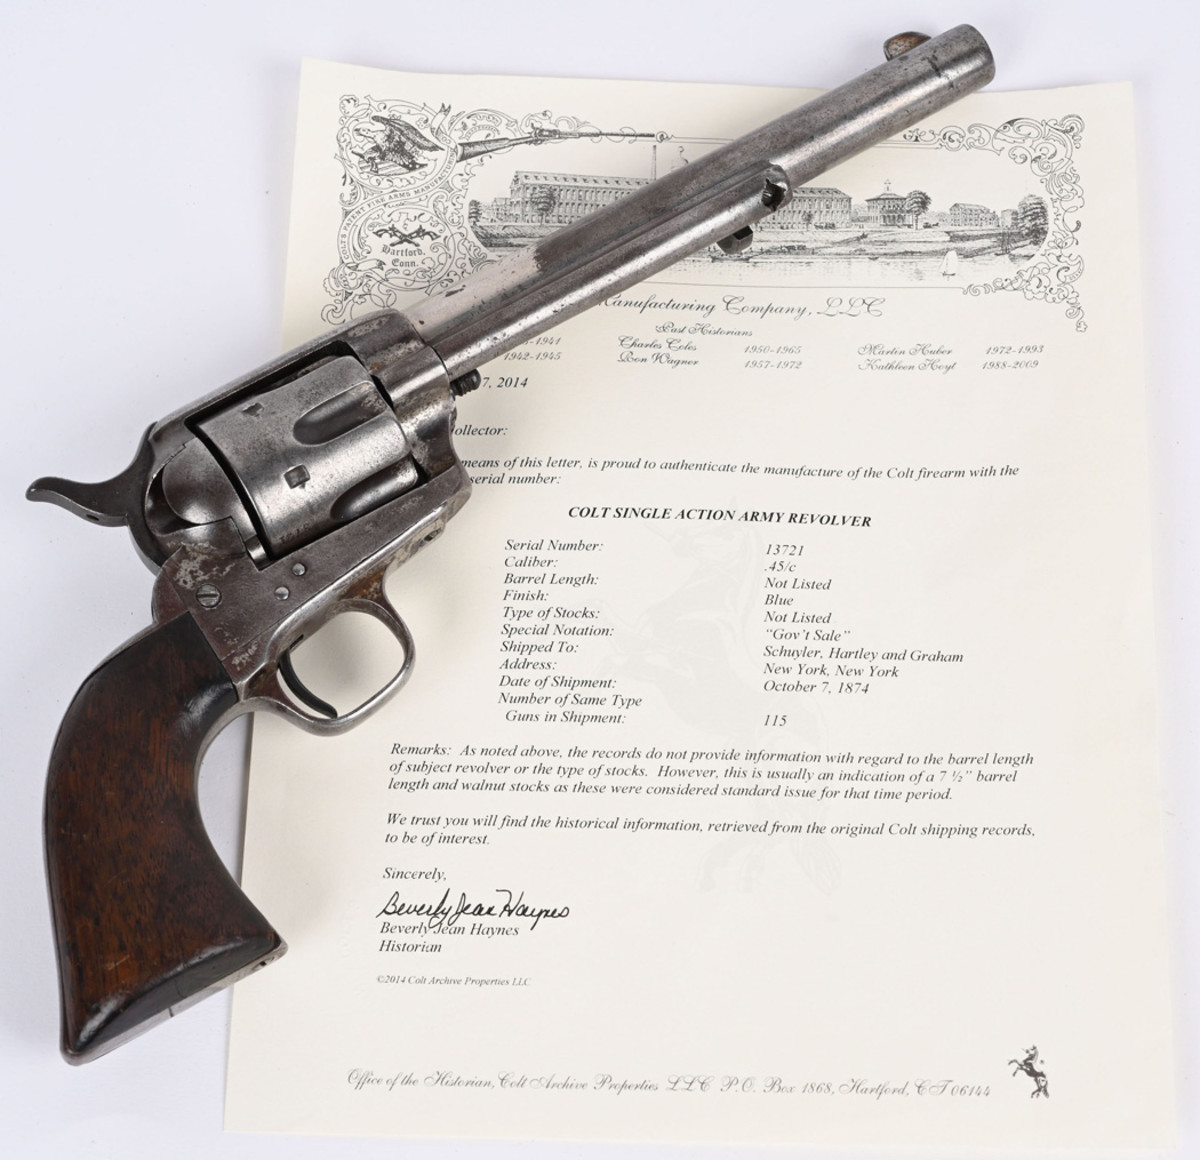 Rare Colt .45 Single-Action U.S. Cavalry Army Revolver manufactured in 1874, serial number 91, one of a shipment of 115 guns sent to Schuyler, Hartley and Graham (NYC) that year. Accompanied by 2014 letter of documentation from Colt factory historian with the notation ‘Gov’t Sale,’ suggesting it may have been a contract overrun or buy back (rejected gun).